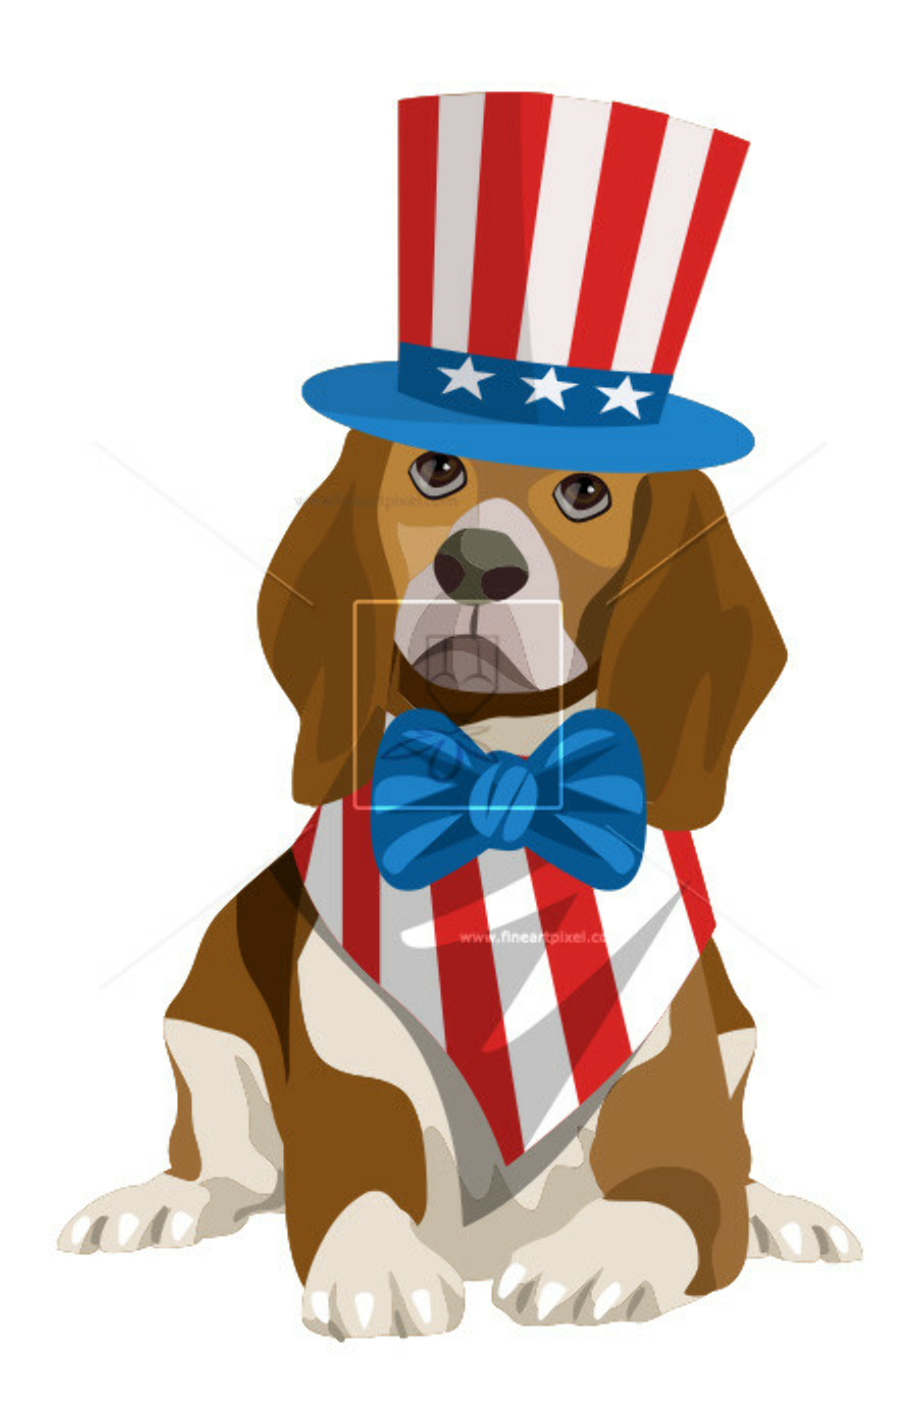 Download High Quality 4th of july clipart dog Transparent PNG Images